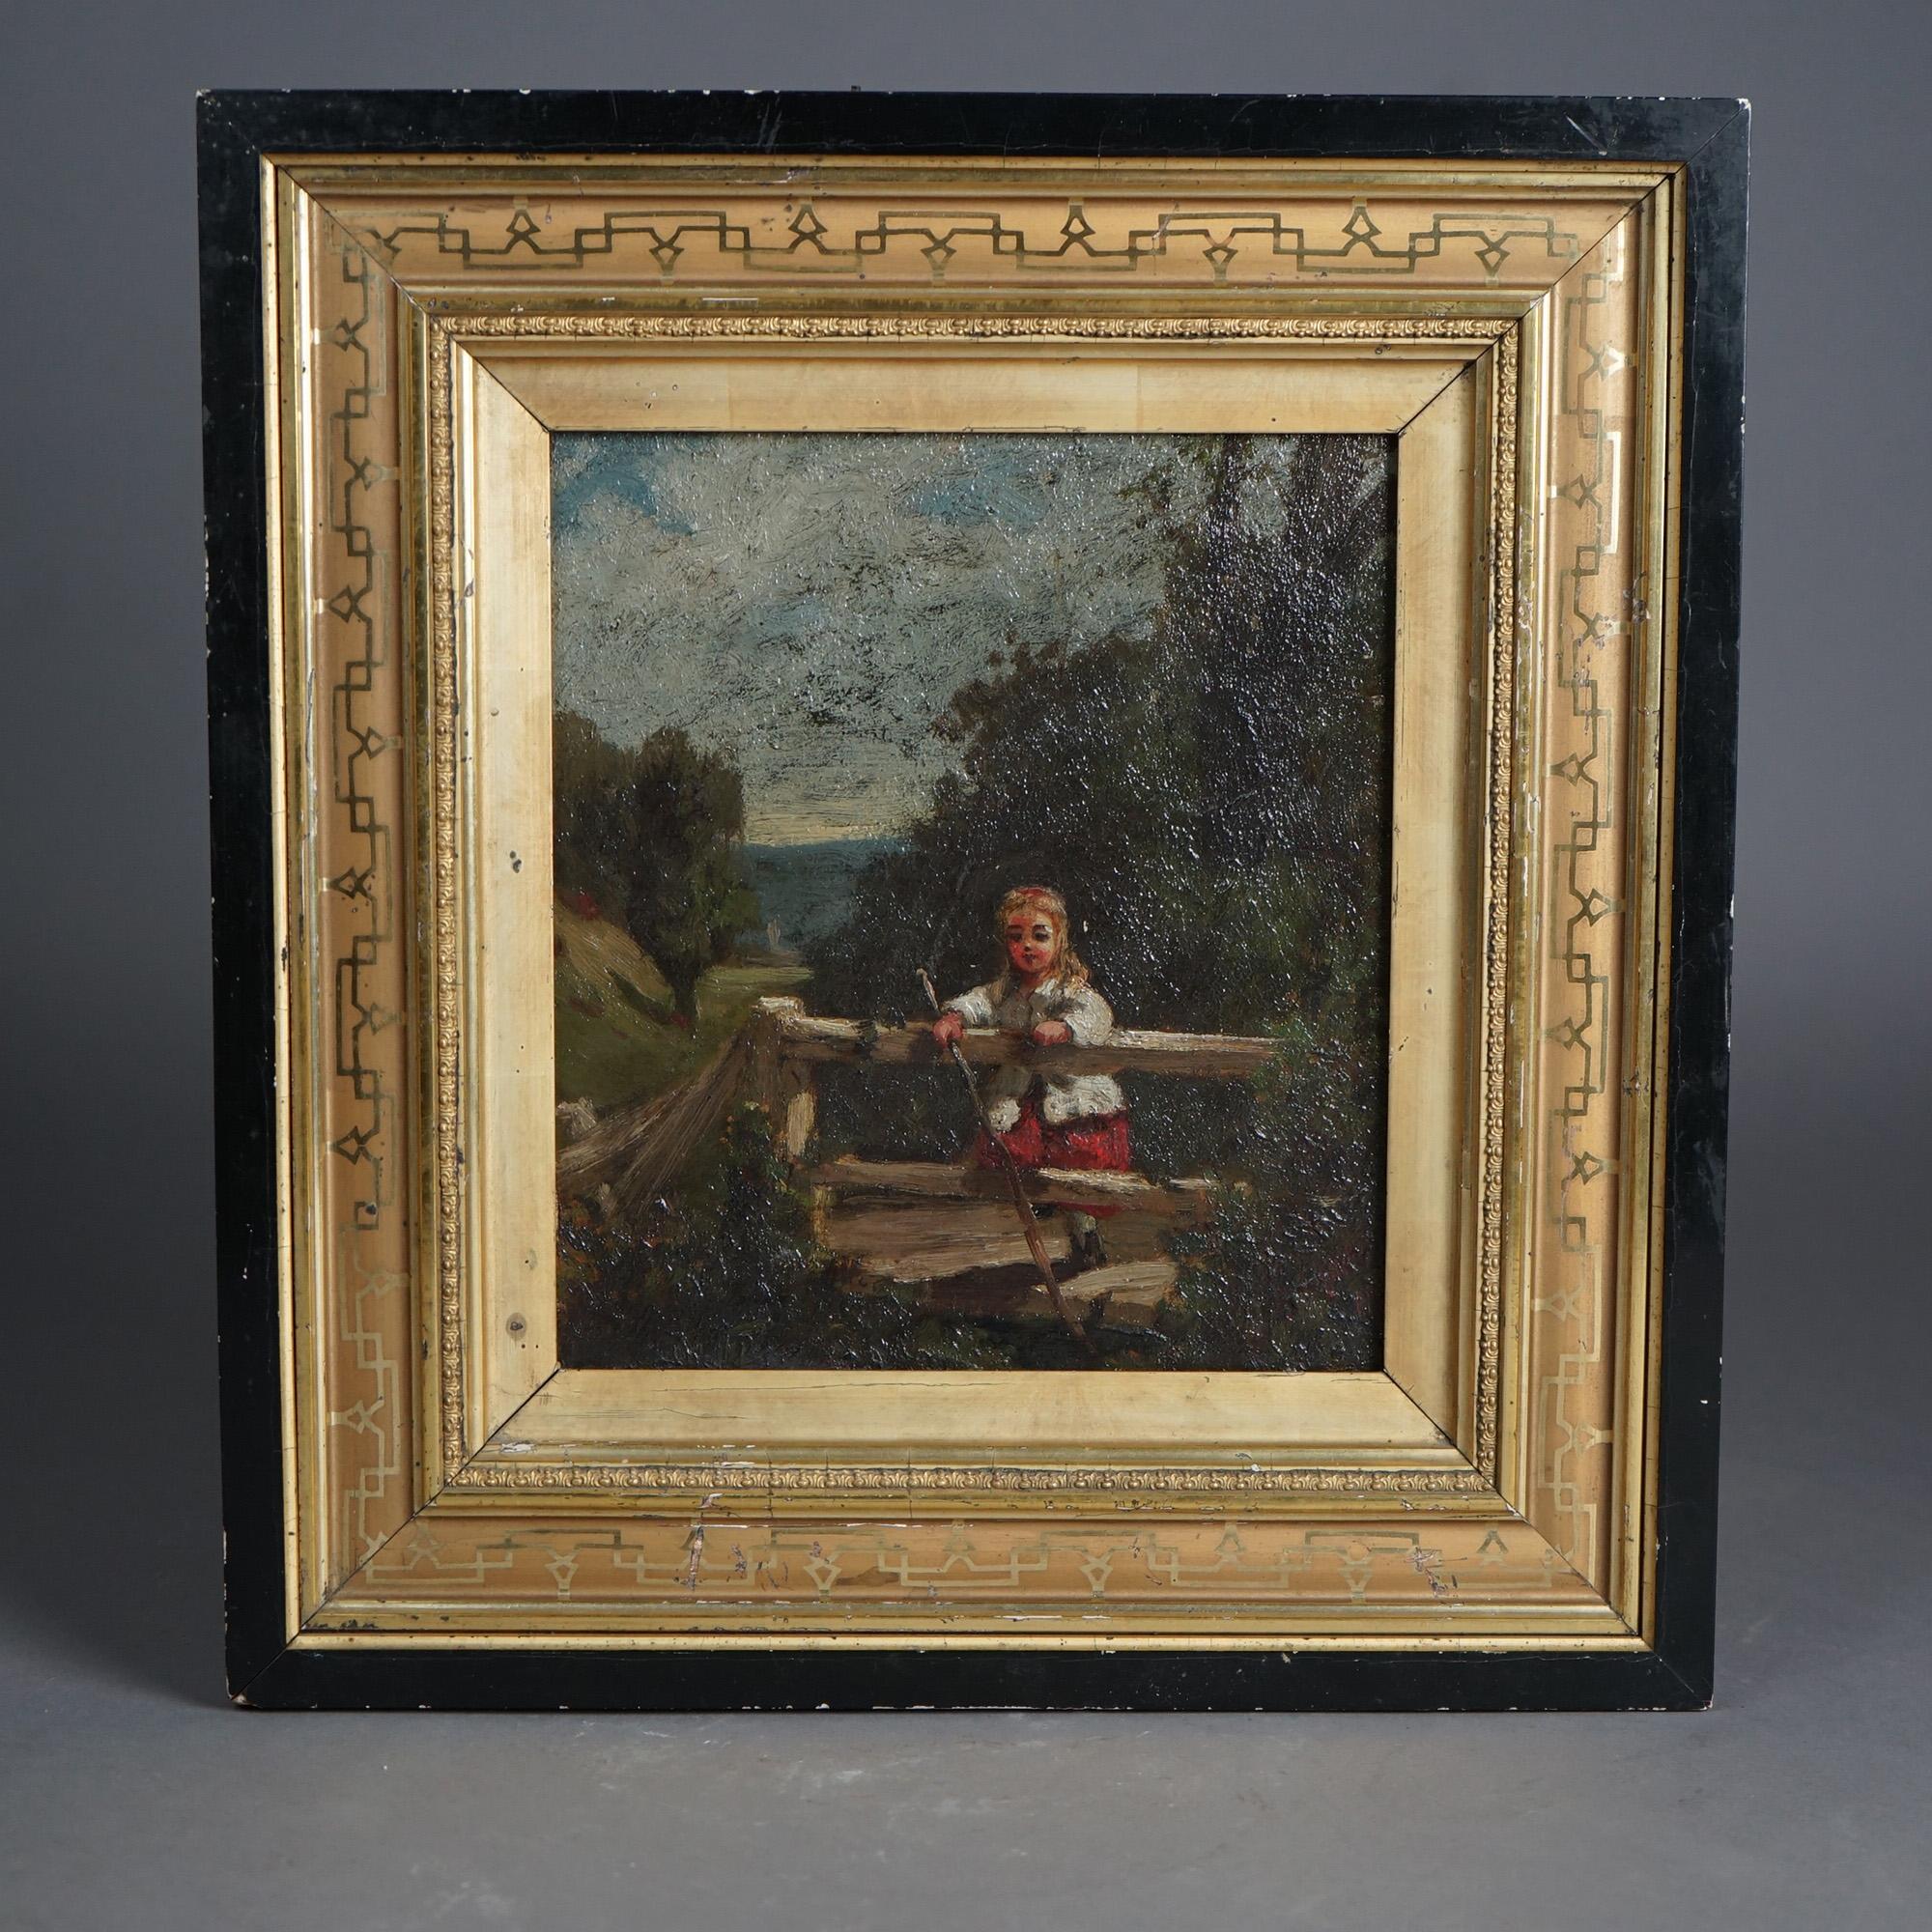 An antique genre painting offers oil on board outdoor scene with child on a bridge, framed, c1890

Measures - 14.5